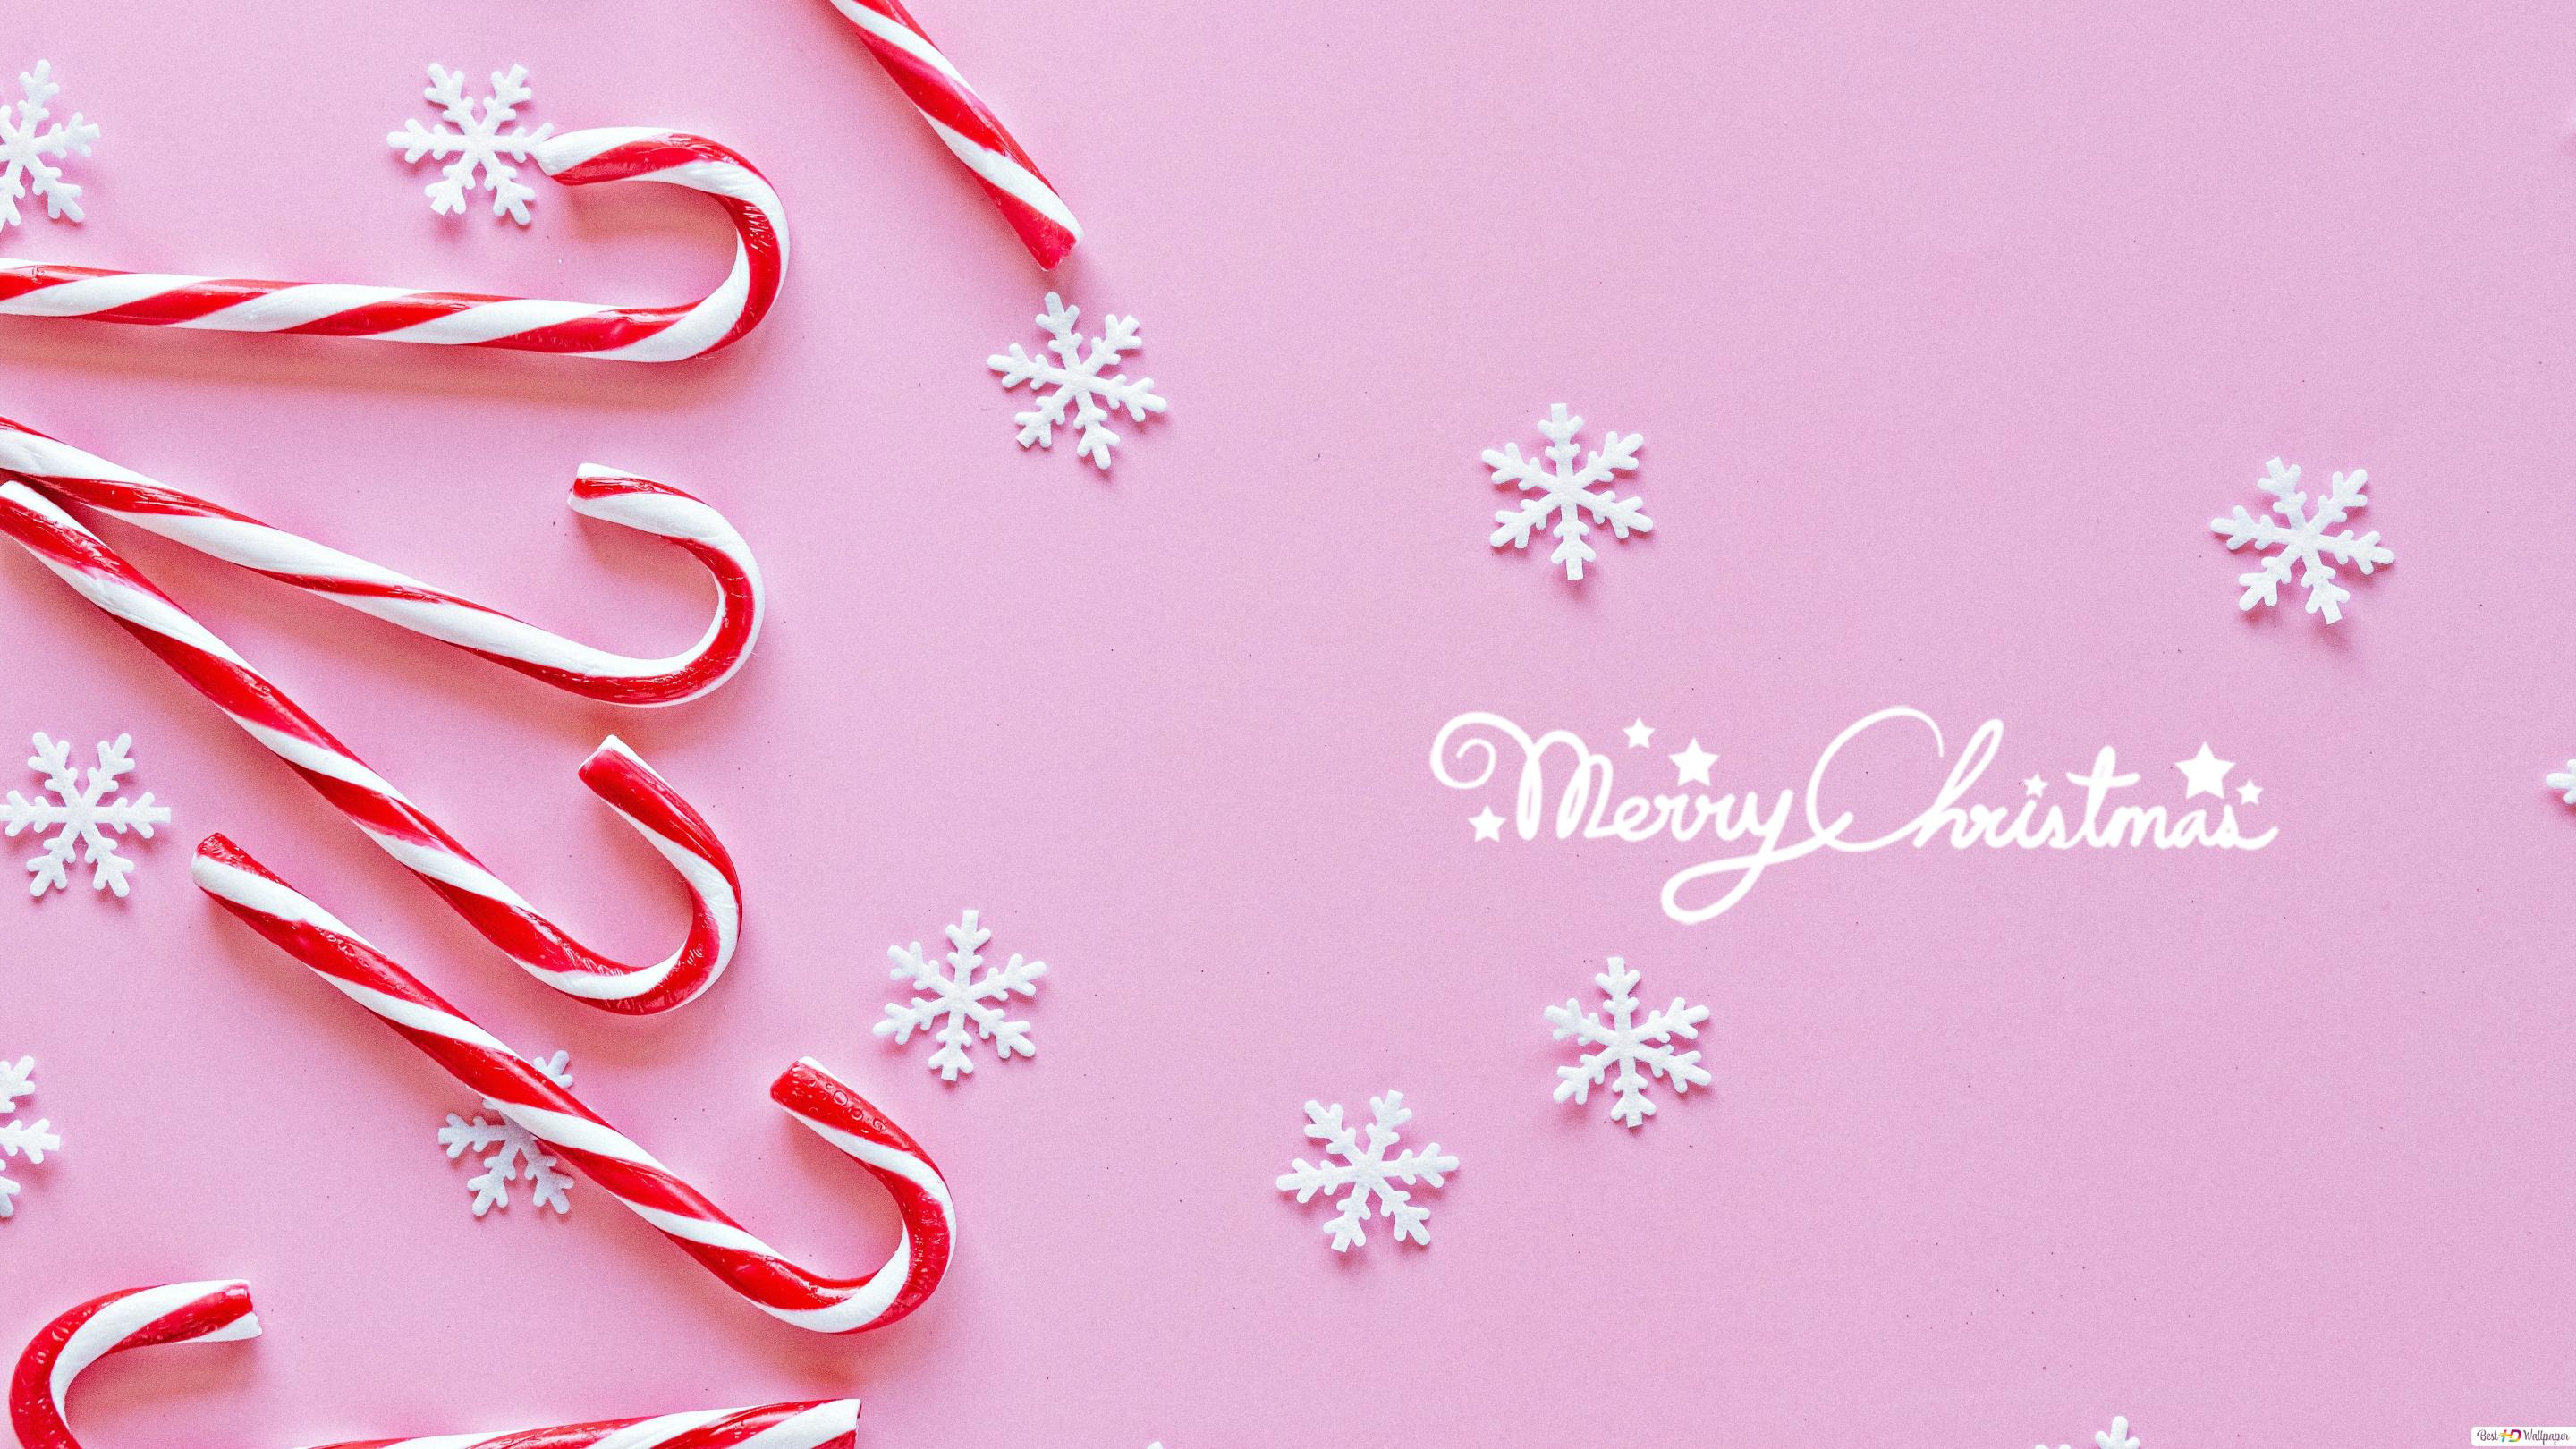 Merry Christmas greetings in pink background with candy cane and snowflakes HD wallpaper download